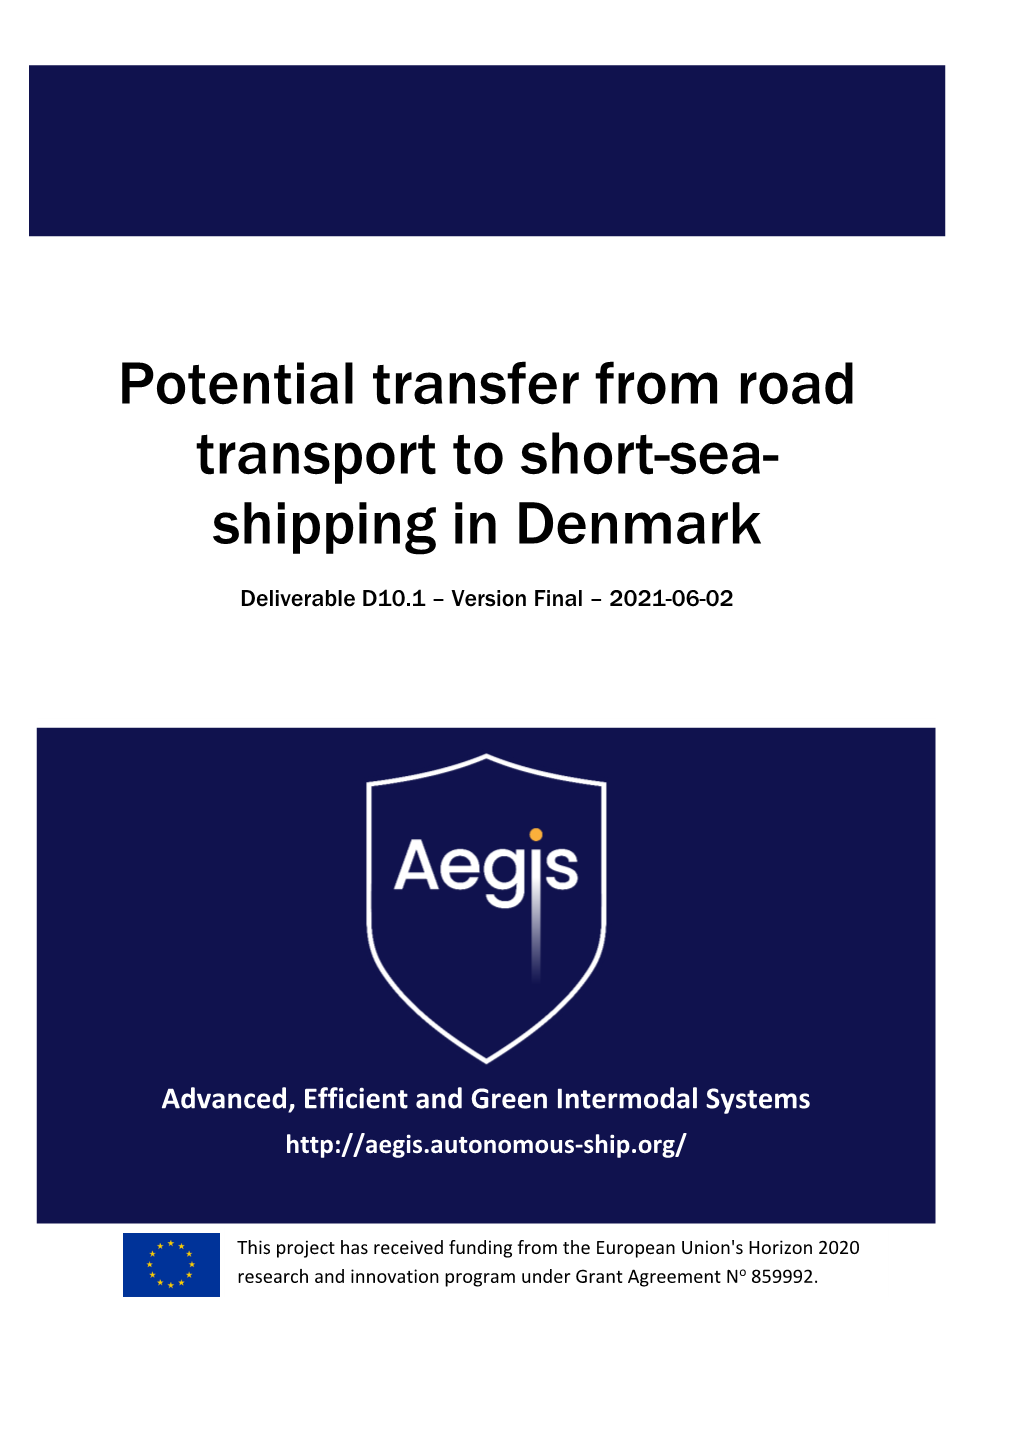 Potential Transfer from Road Transport to Short-Sea-Shipping in Denmark